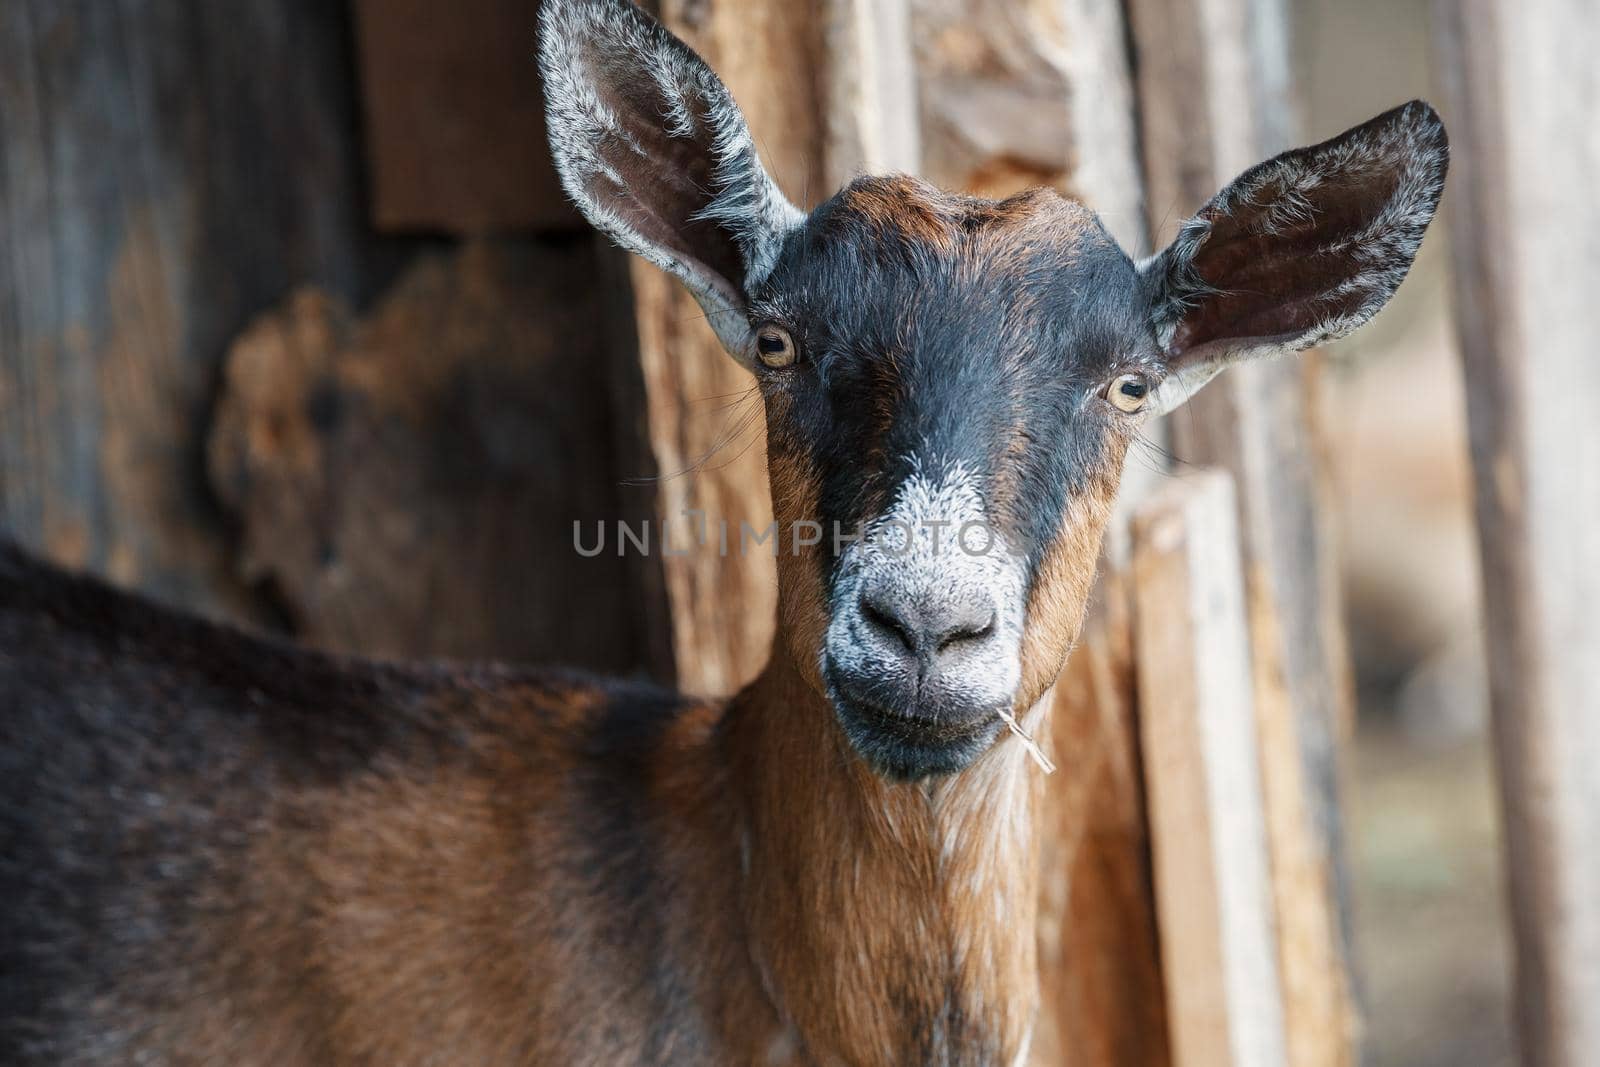 A close-up portrait of a young brown and black goat with straw in his mouth. by Lincikas